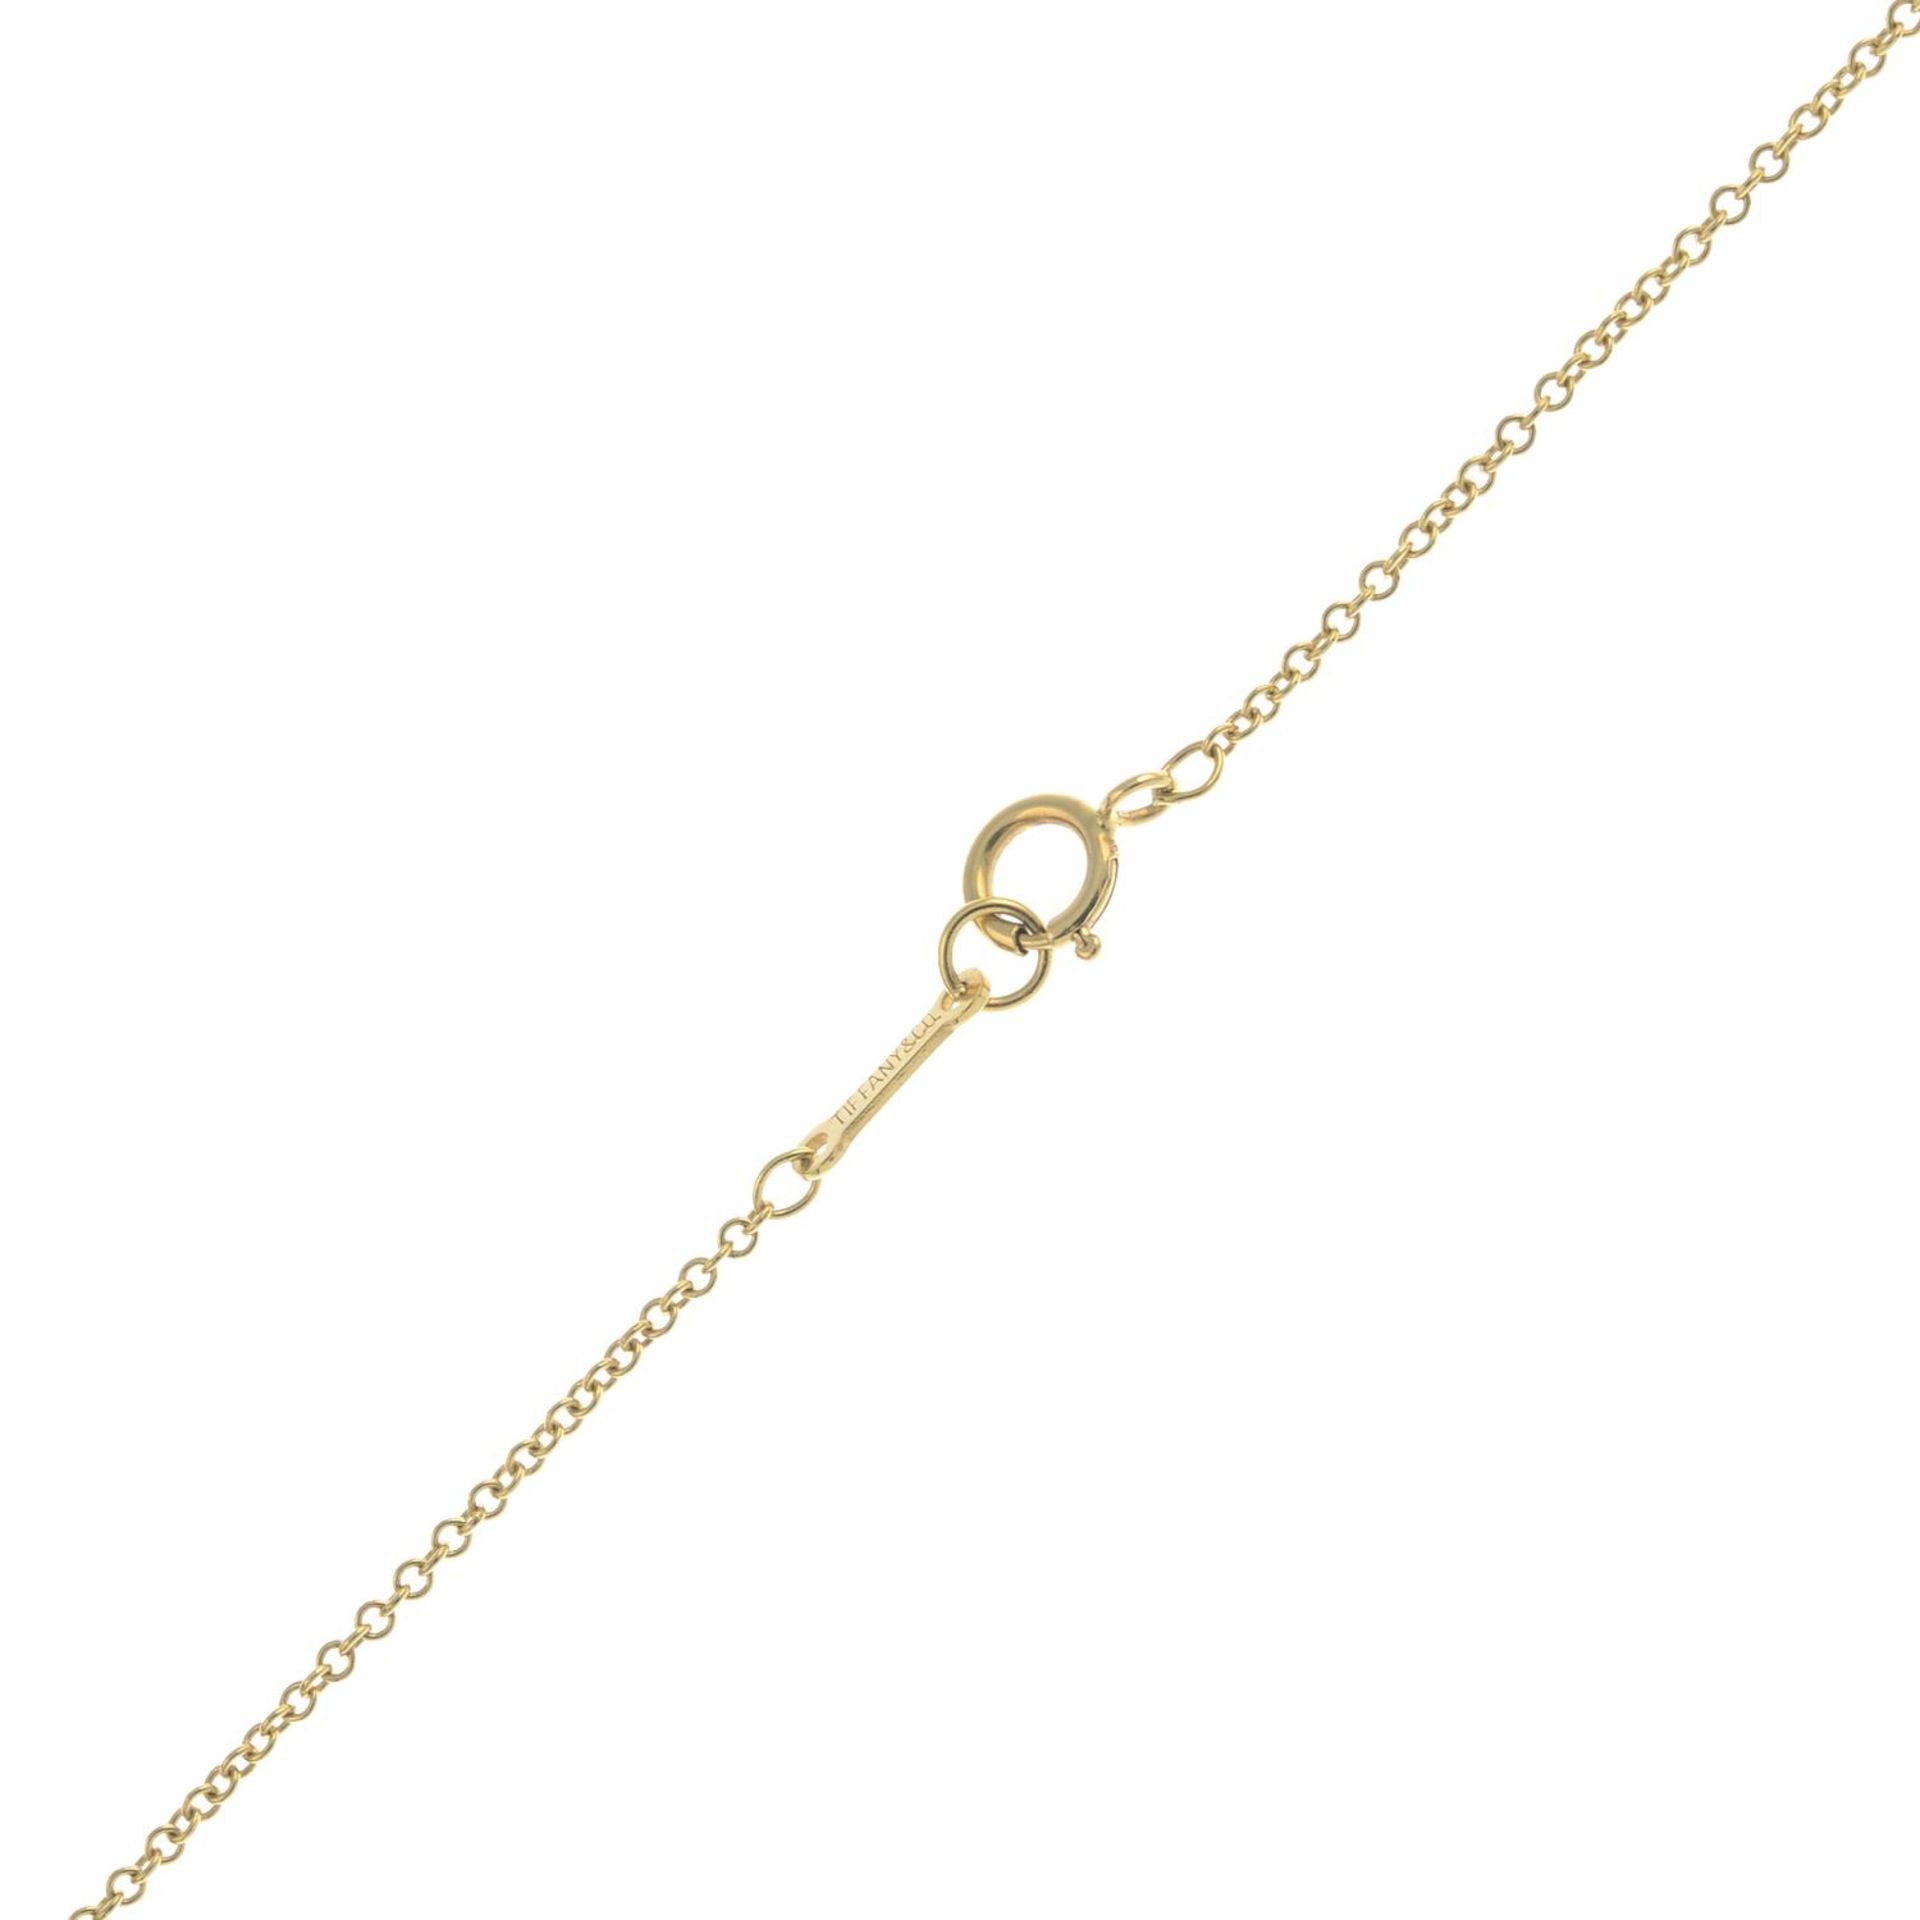 An 'Open Heart' pendant, suspended from a chain, by Elsa Peretti, for Tiffany & Co. - Image 3 of 3